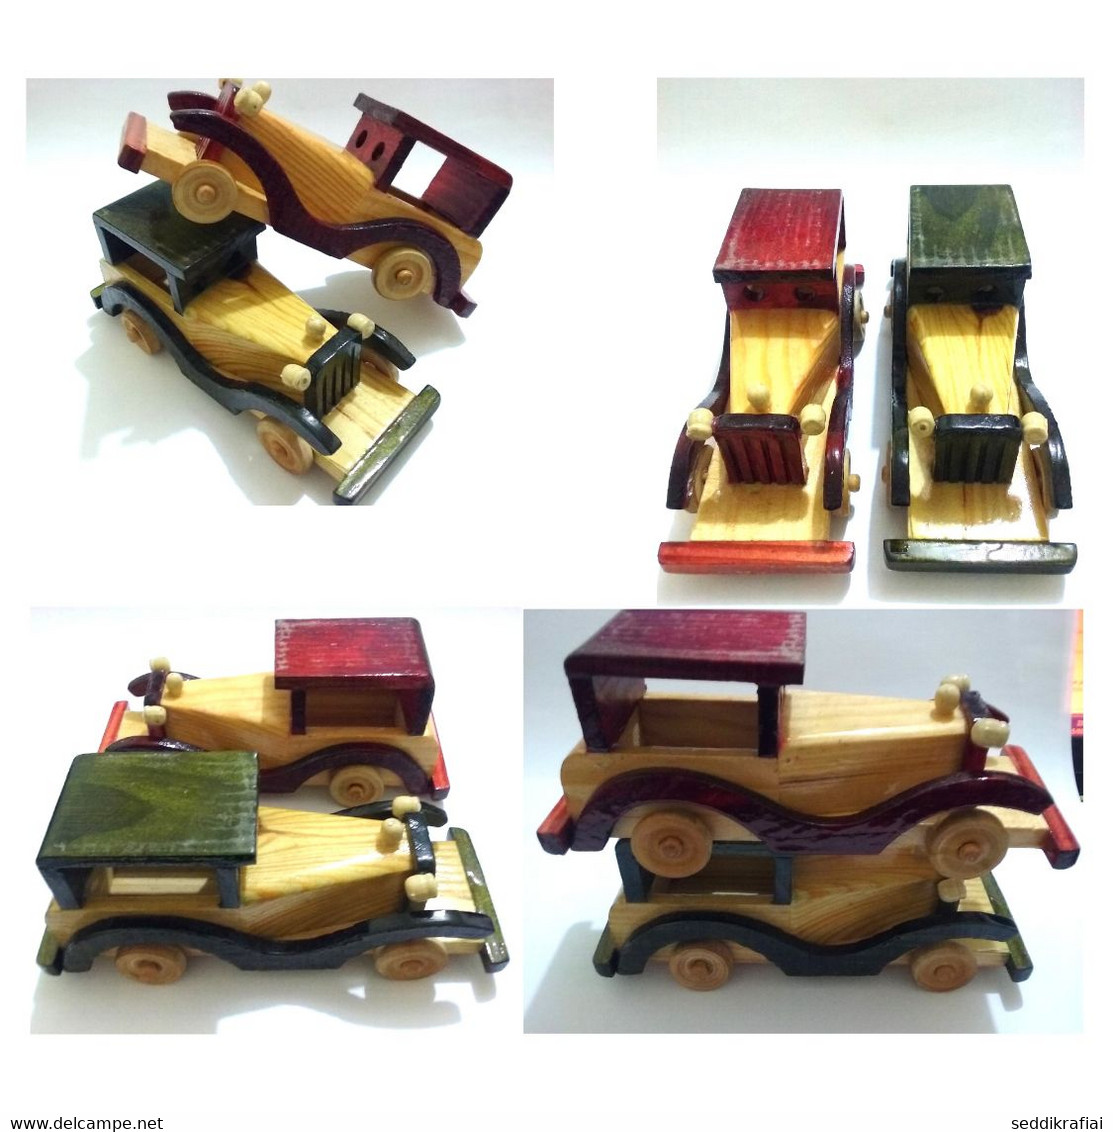 2 Cars Decoration An Old-Fashioned 100% Wooden Of Traditional Moroccan Handicraf - Art Nouveau / Art Deco